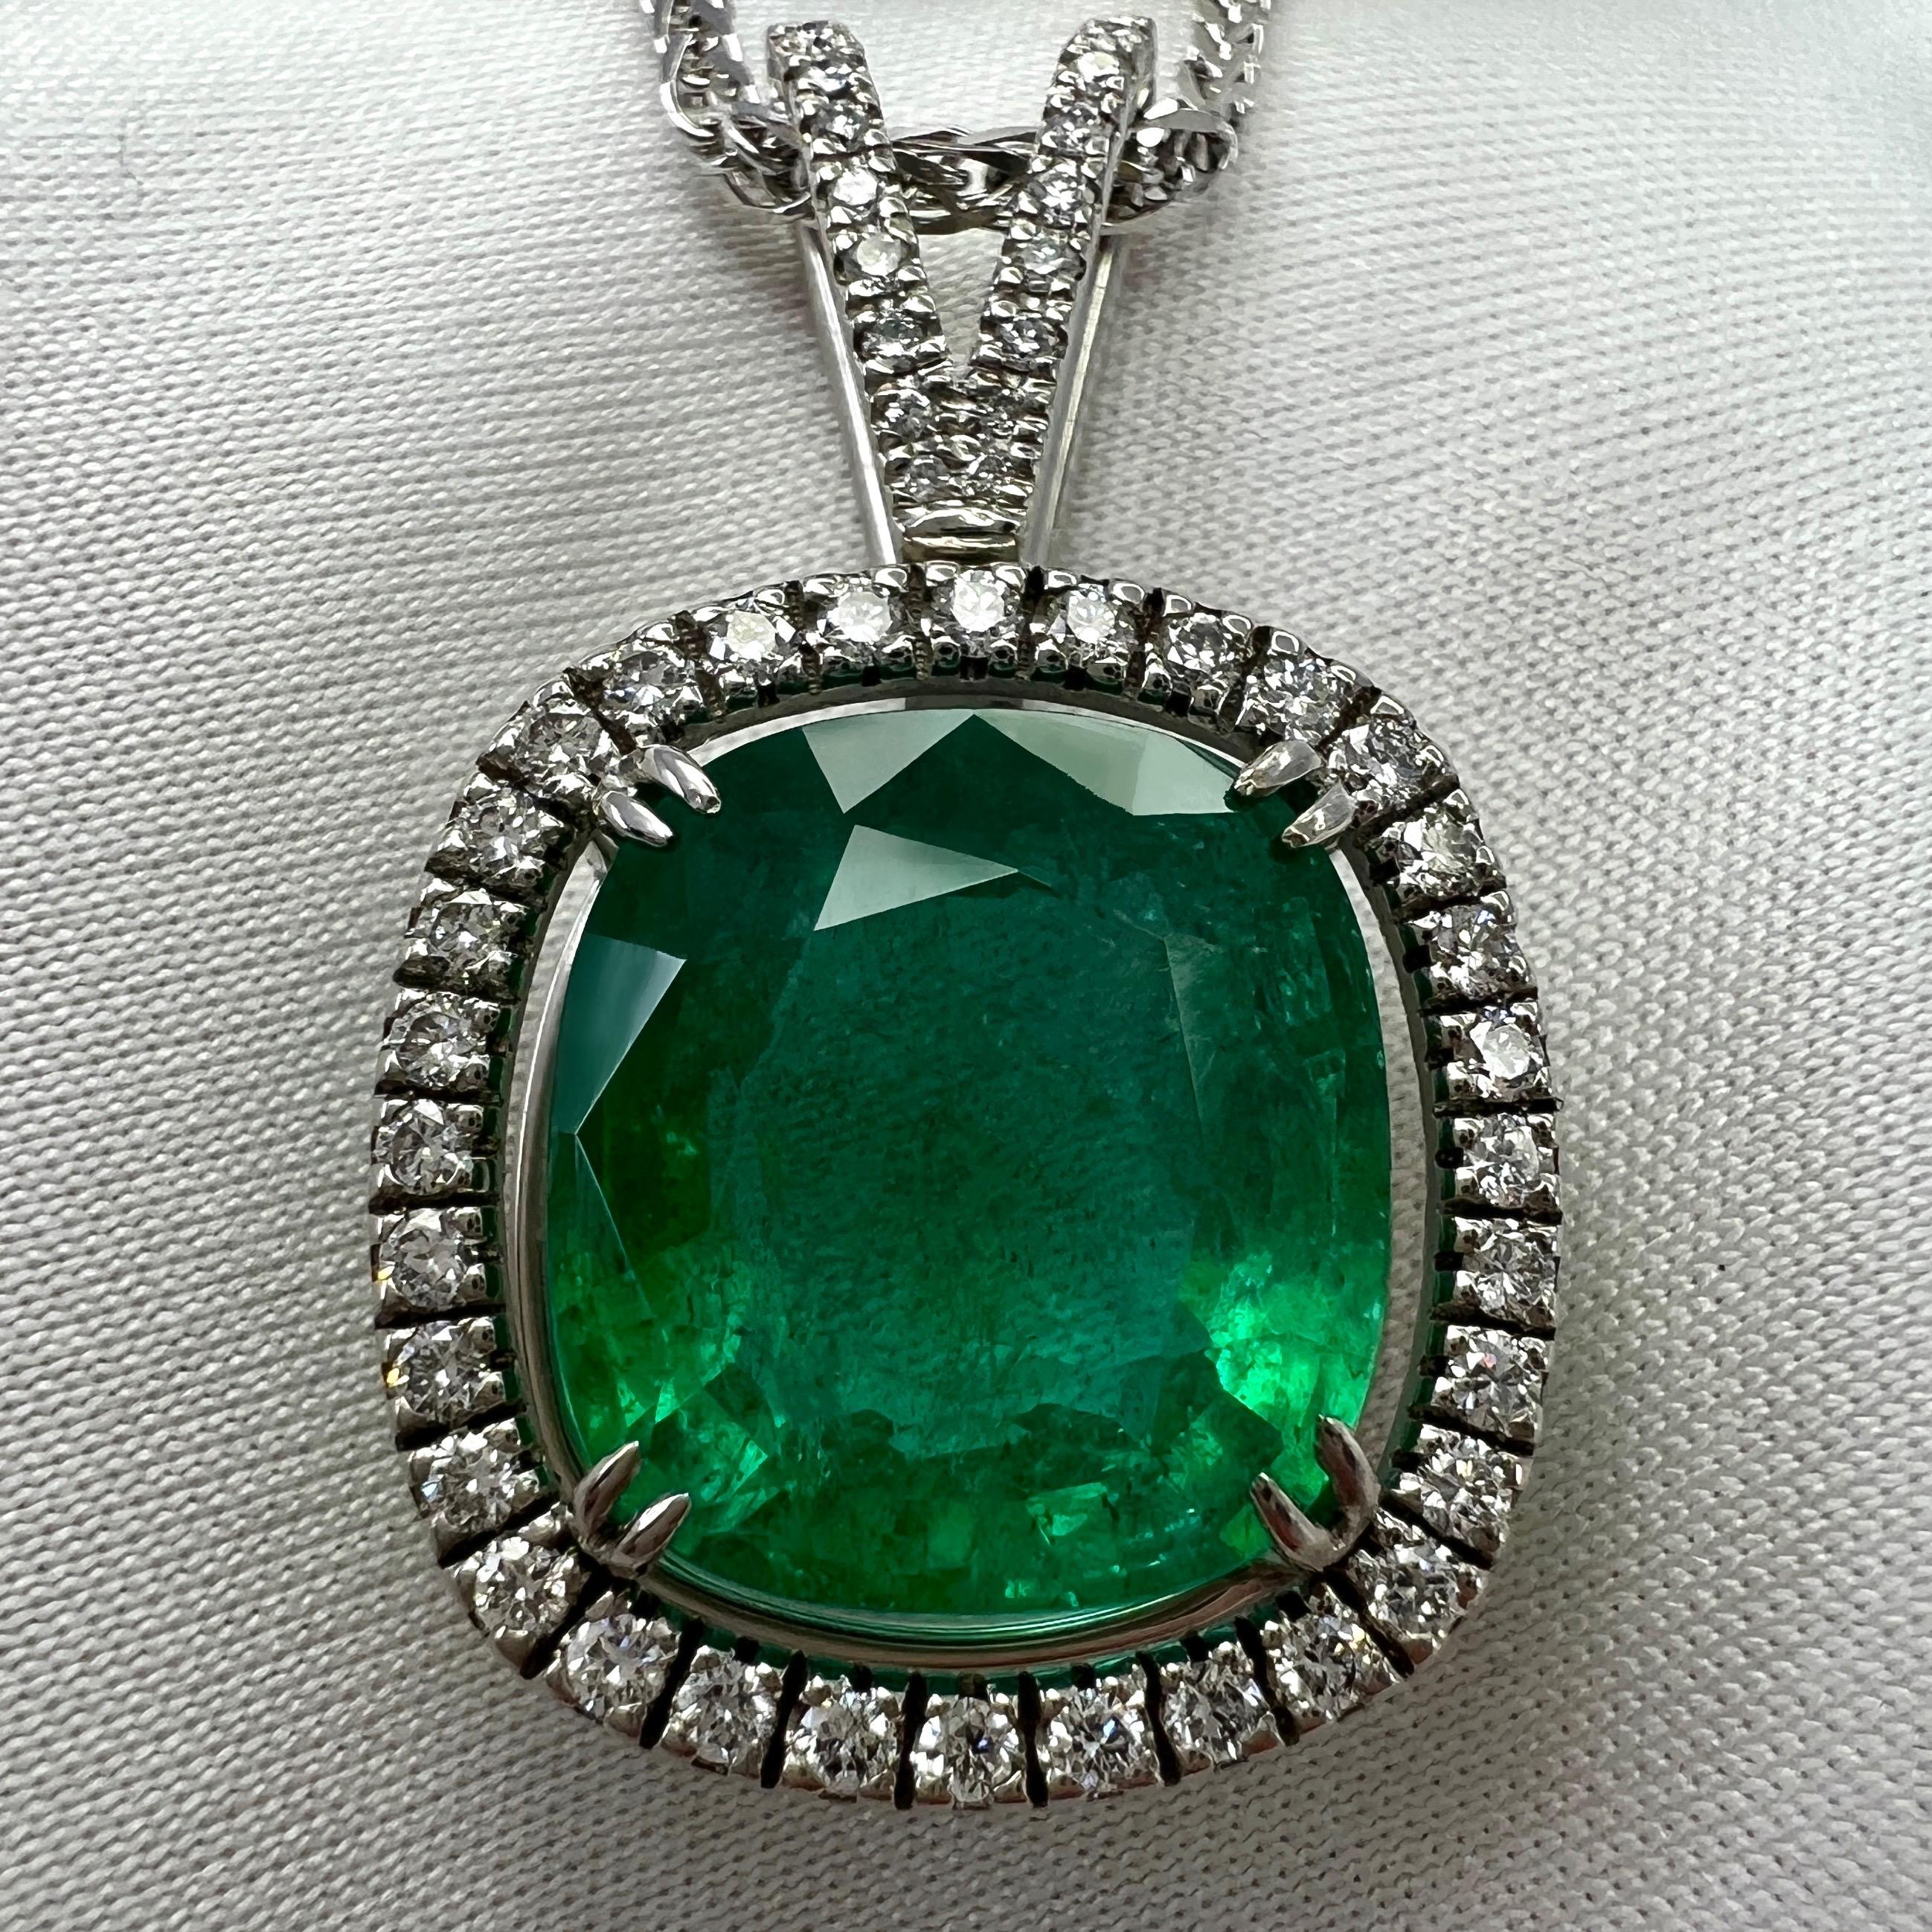 GIA Certified Rare Russian Emerald & Diamond 18k White Gold Halo Pendant Necklace.

This beautiful necklace features a very rare 'old stock' Russian emerald. These emeralds are exceptionally rare and hardly ever make it to the open market.

This is